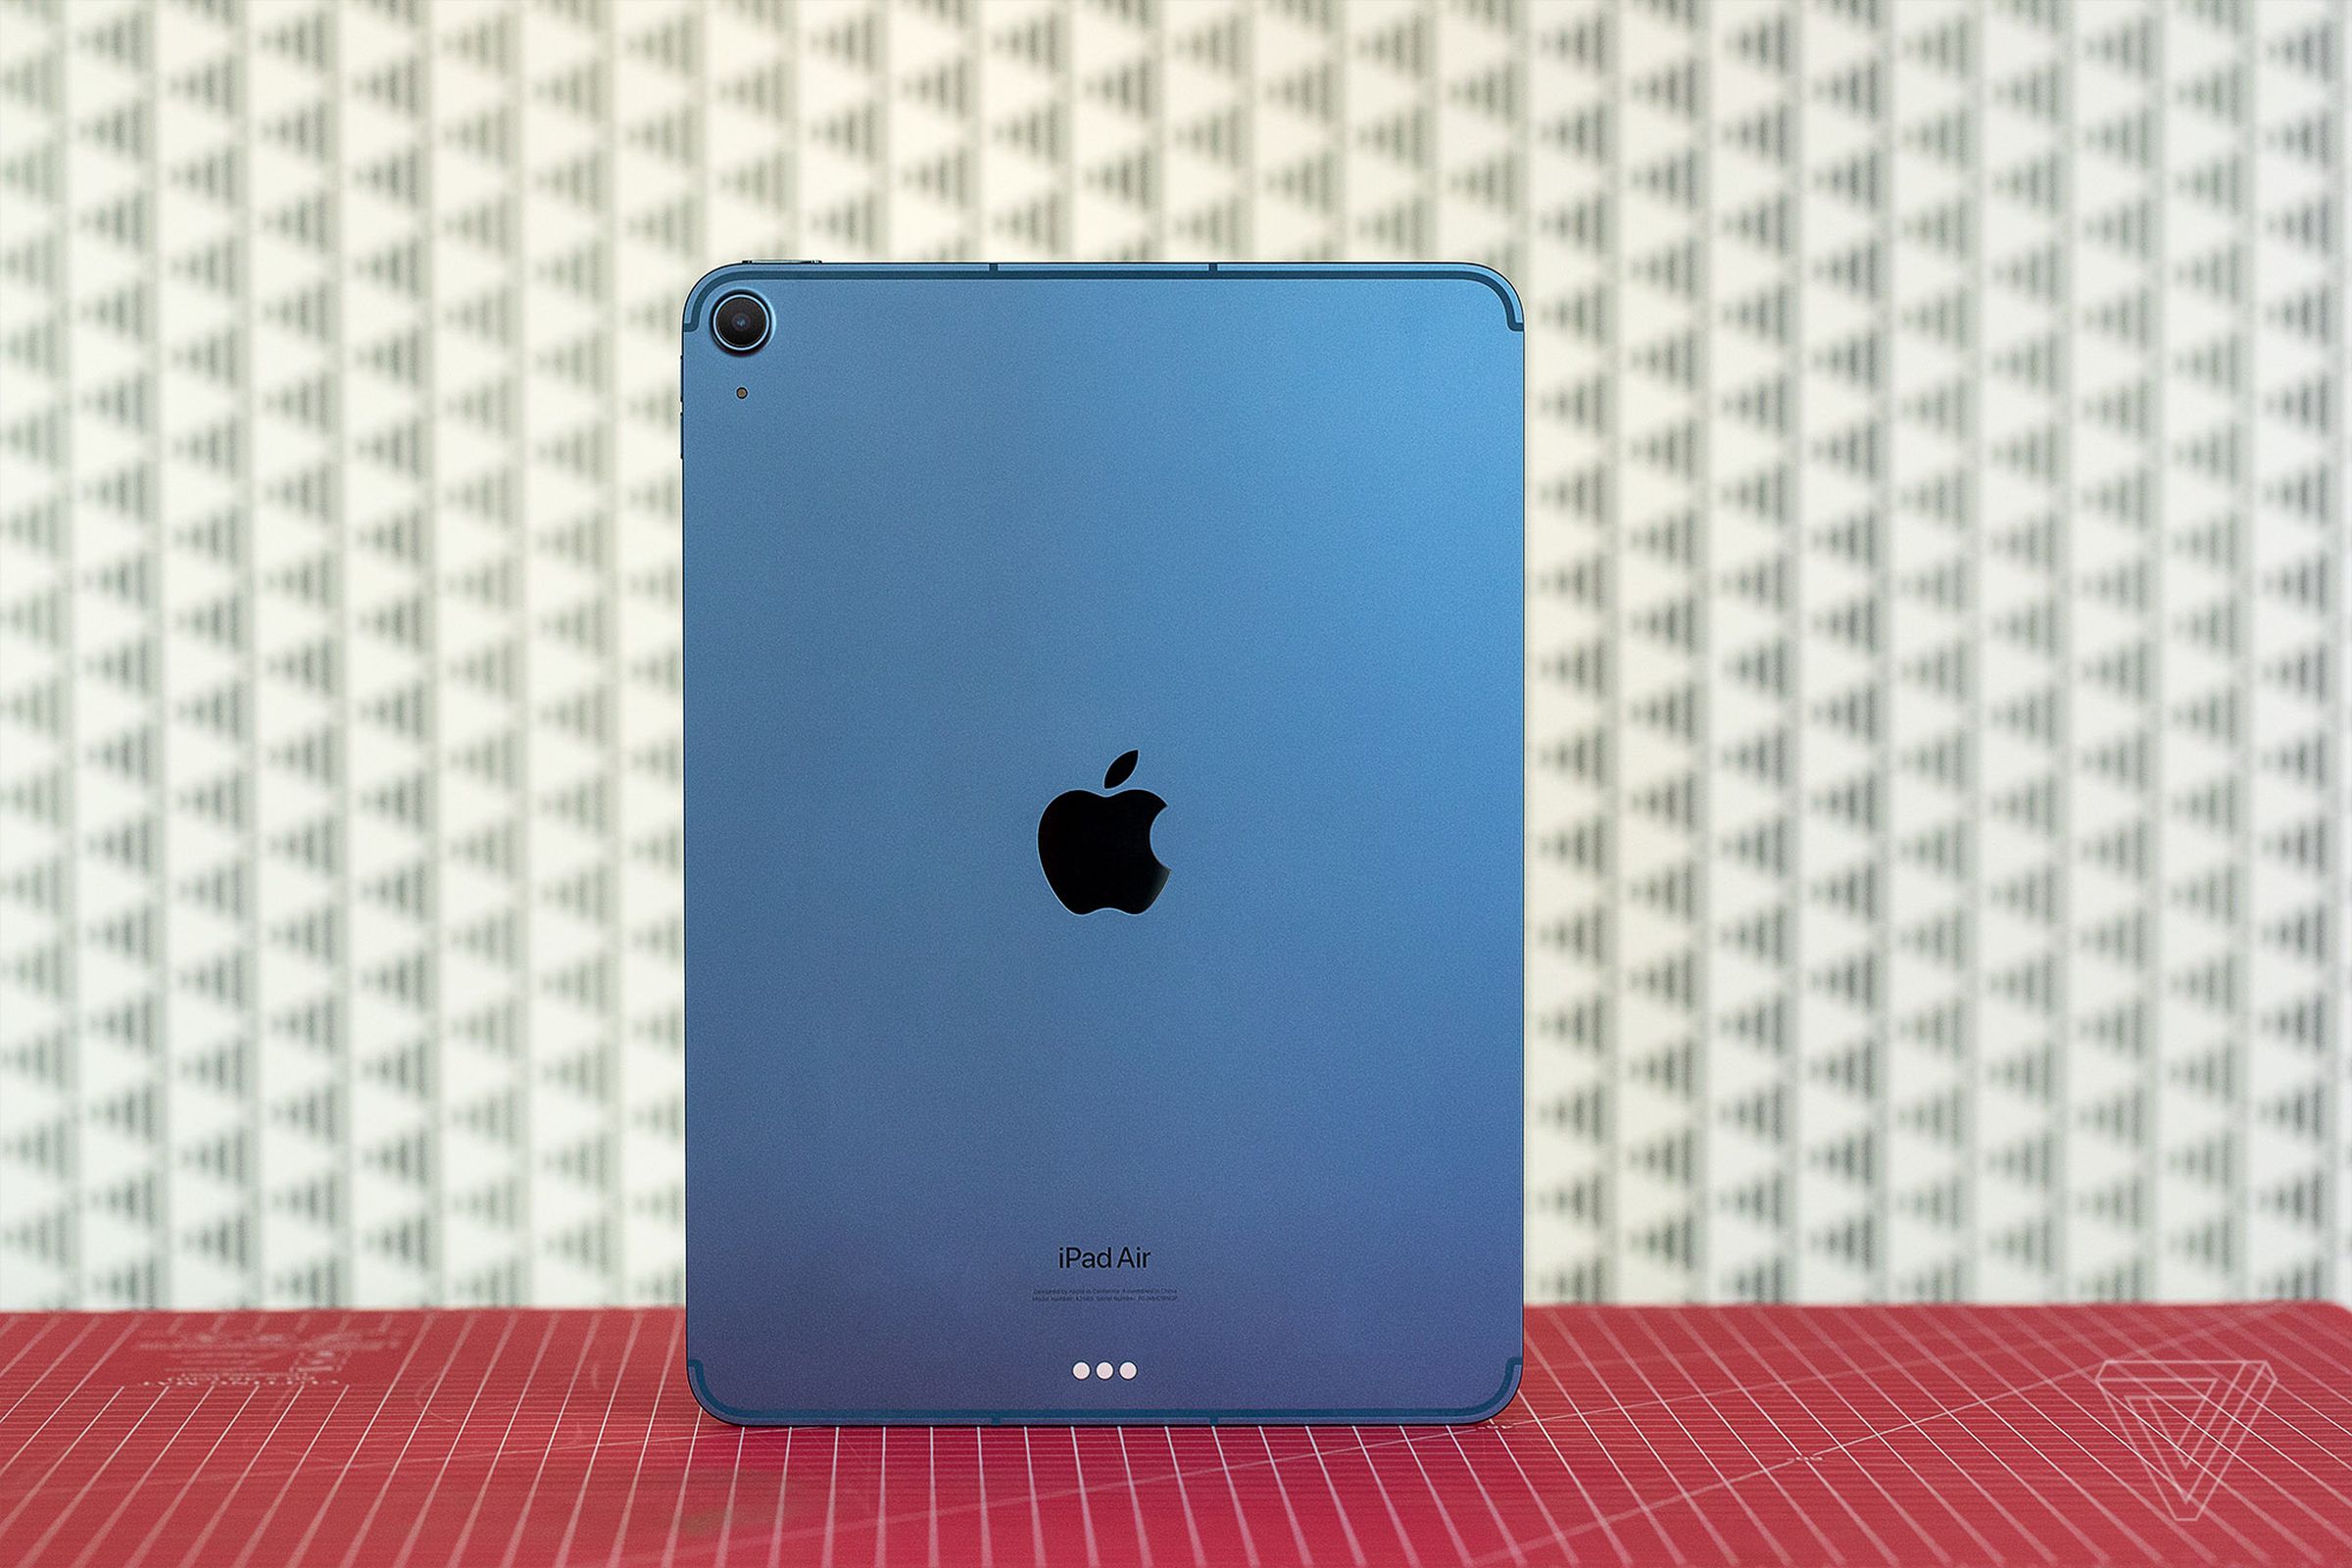 The rear of the 2022 iPad Air, in blue, in front of a patterned background.